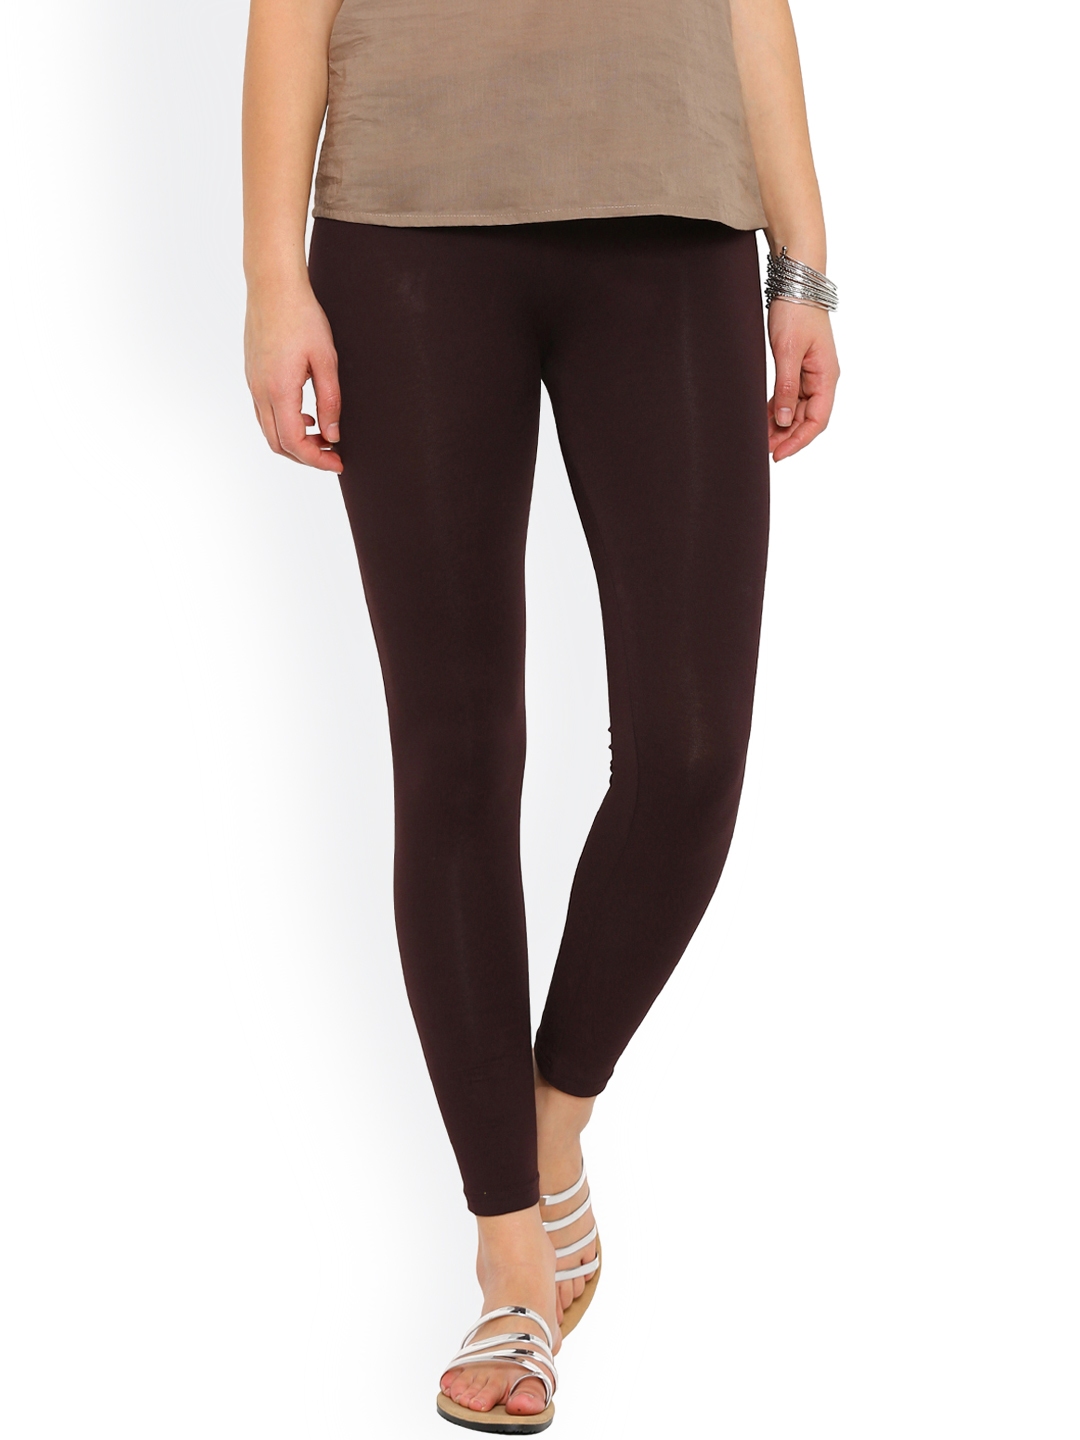 Coffee Brown color stretchable cotton ankle Leggings-LGA70